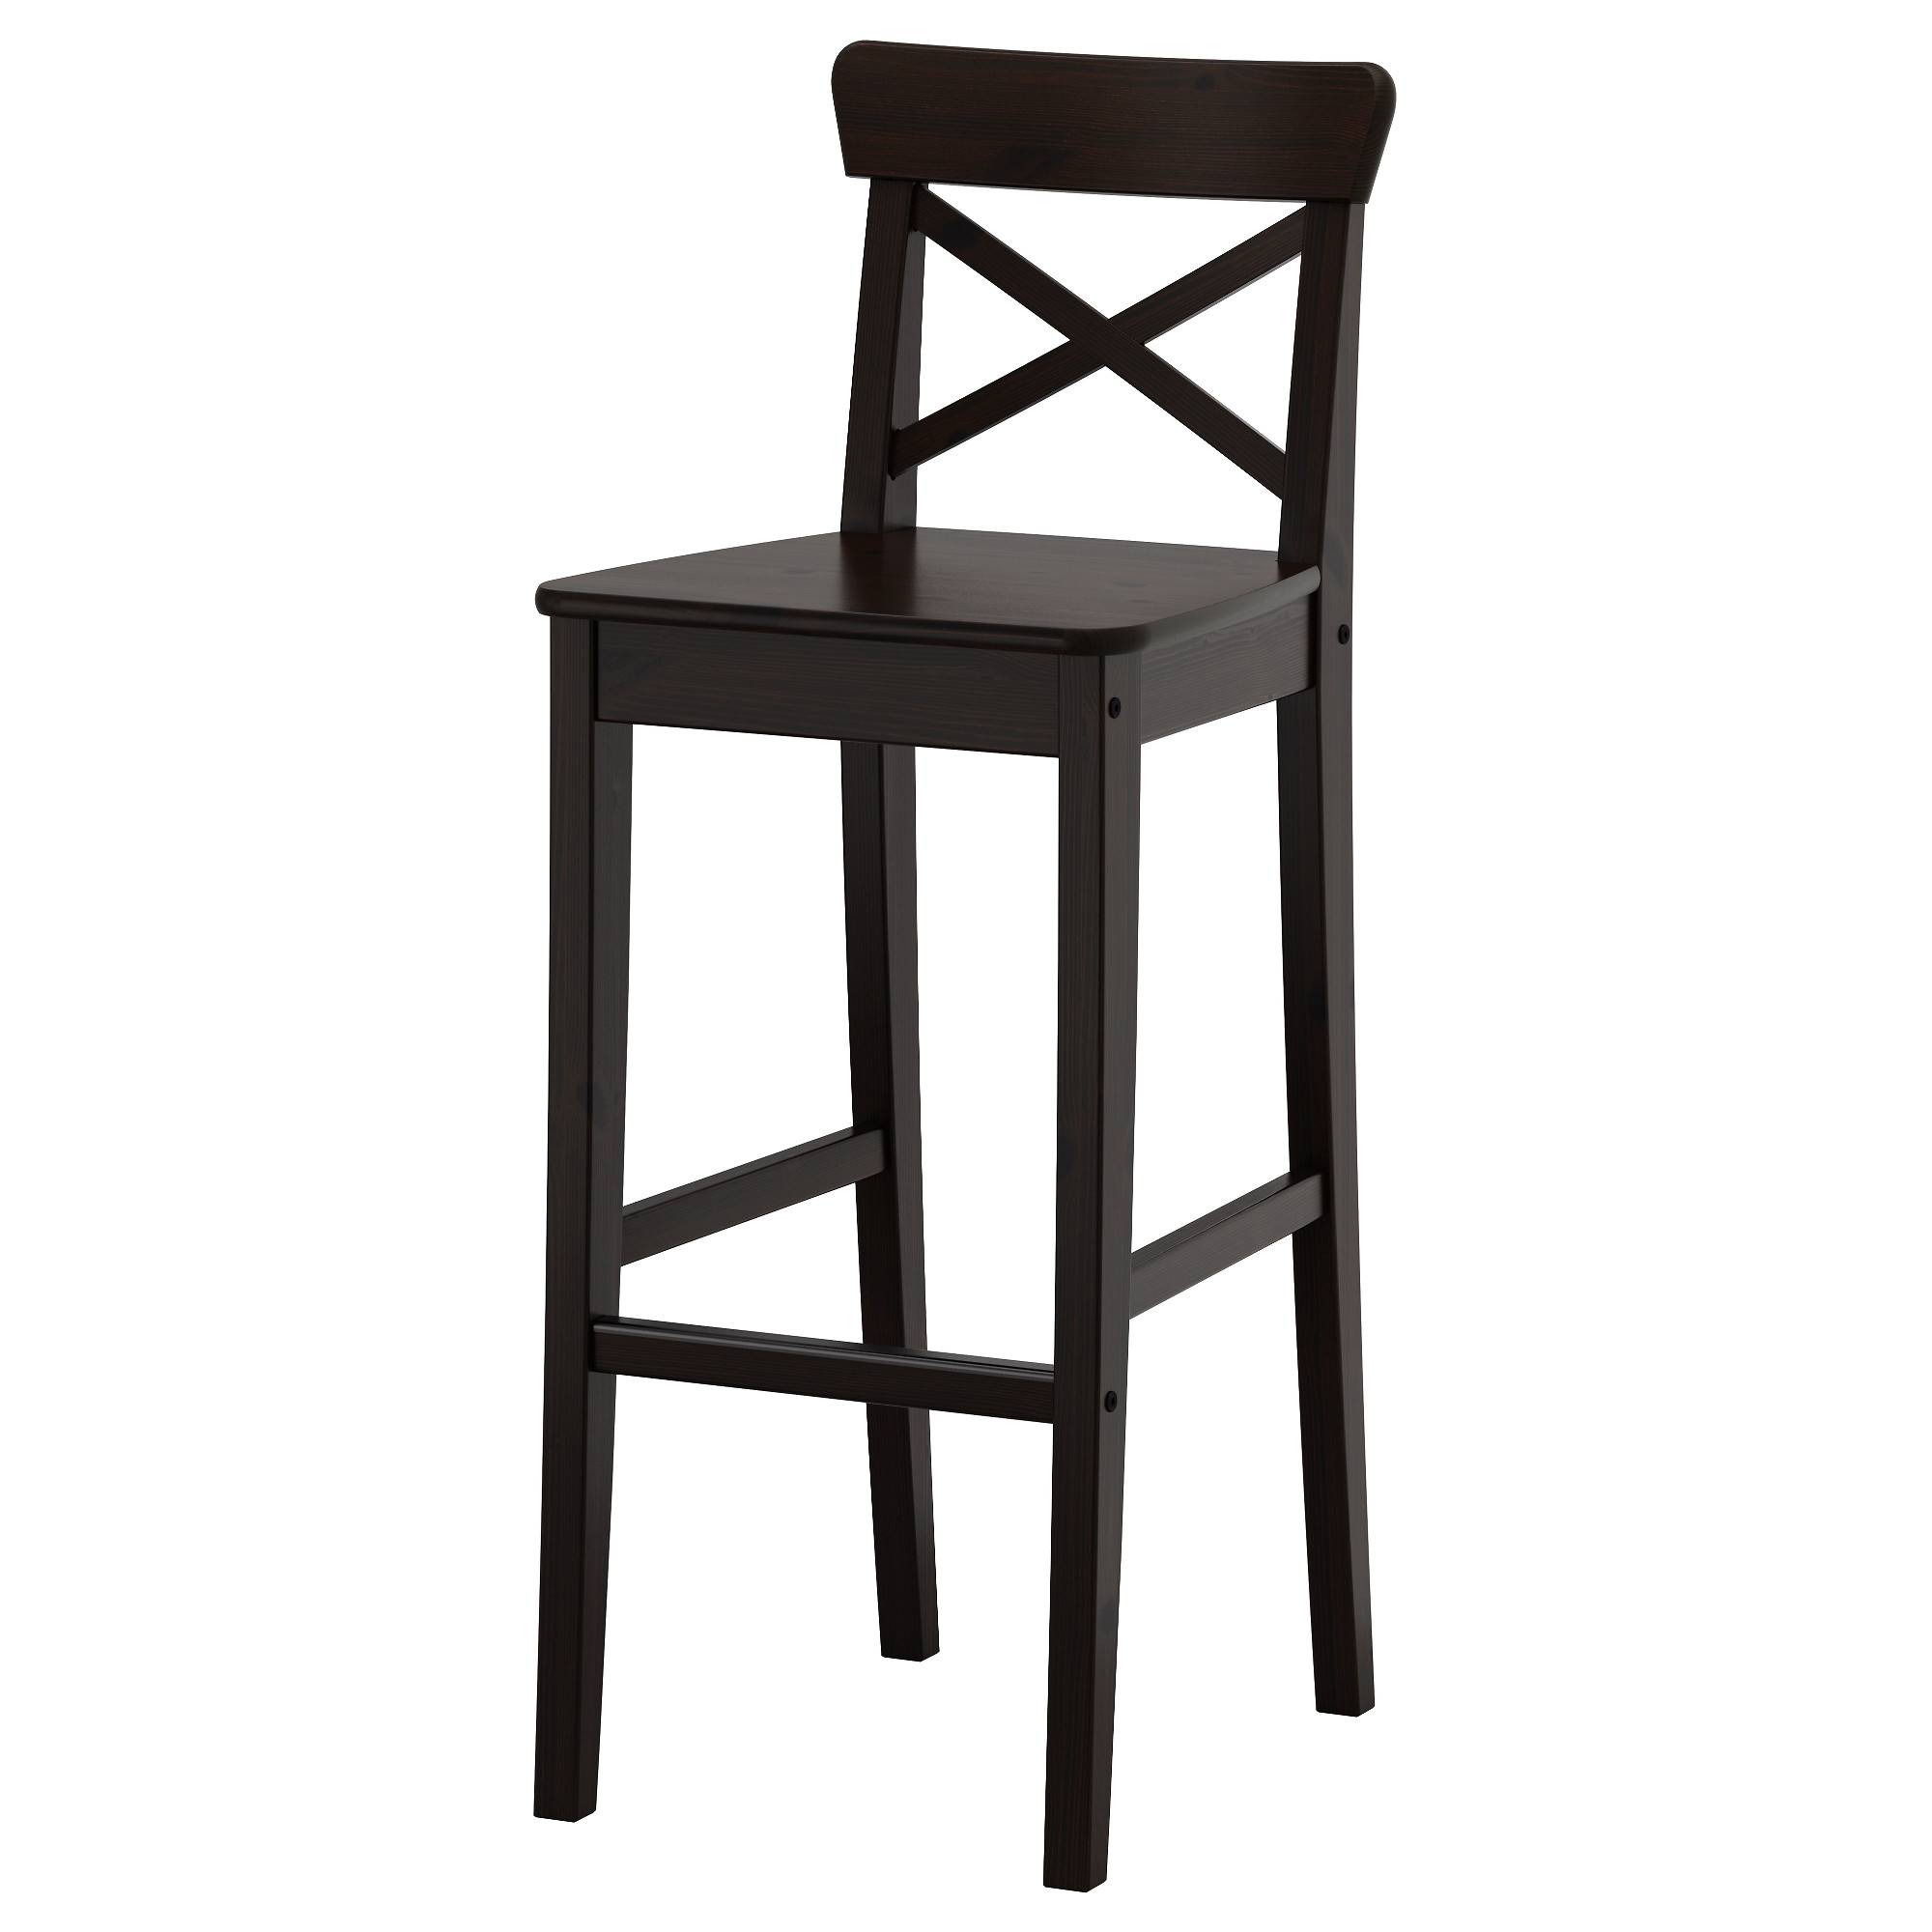 Bar stools and table clipart